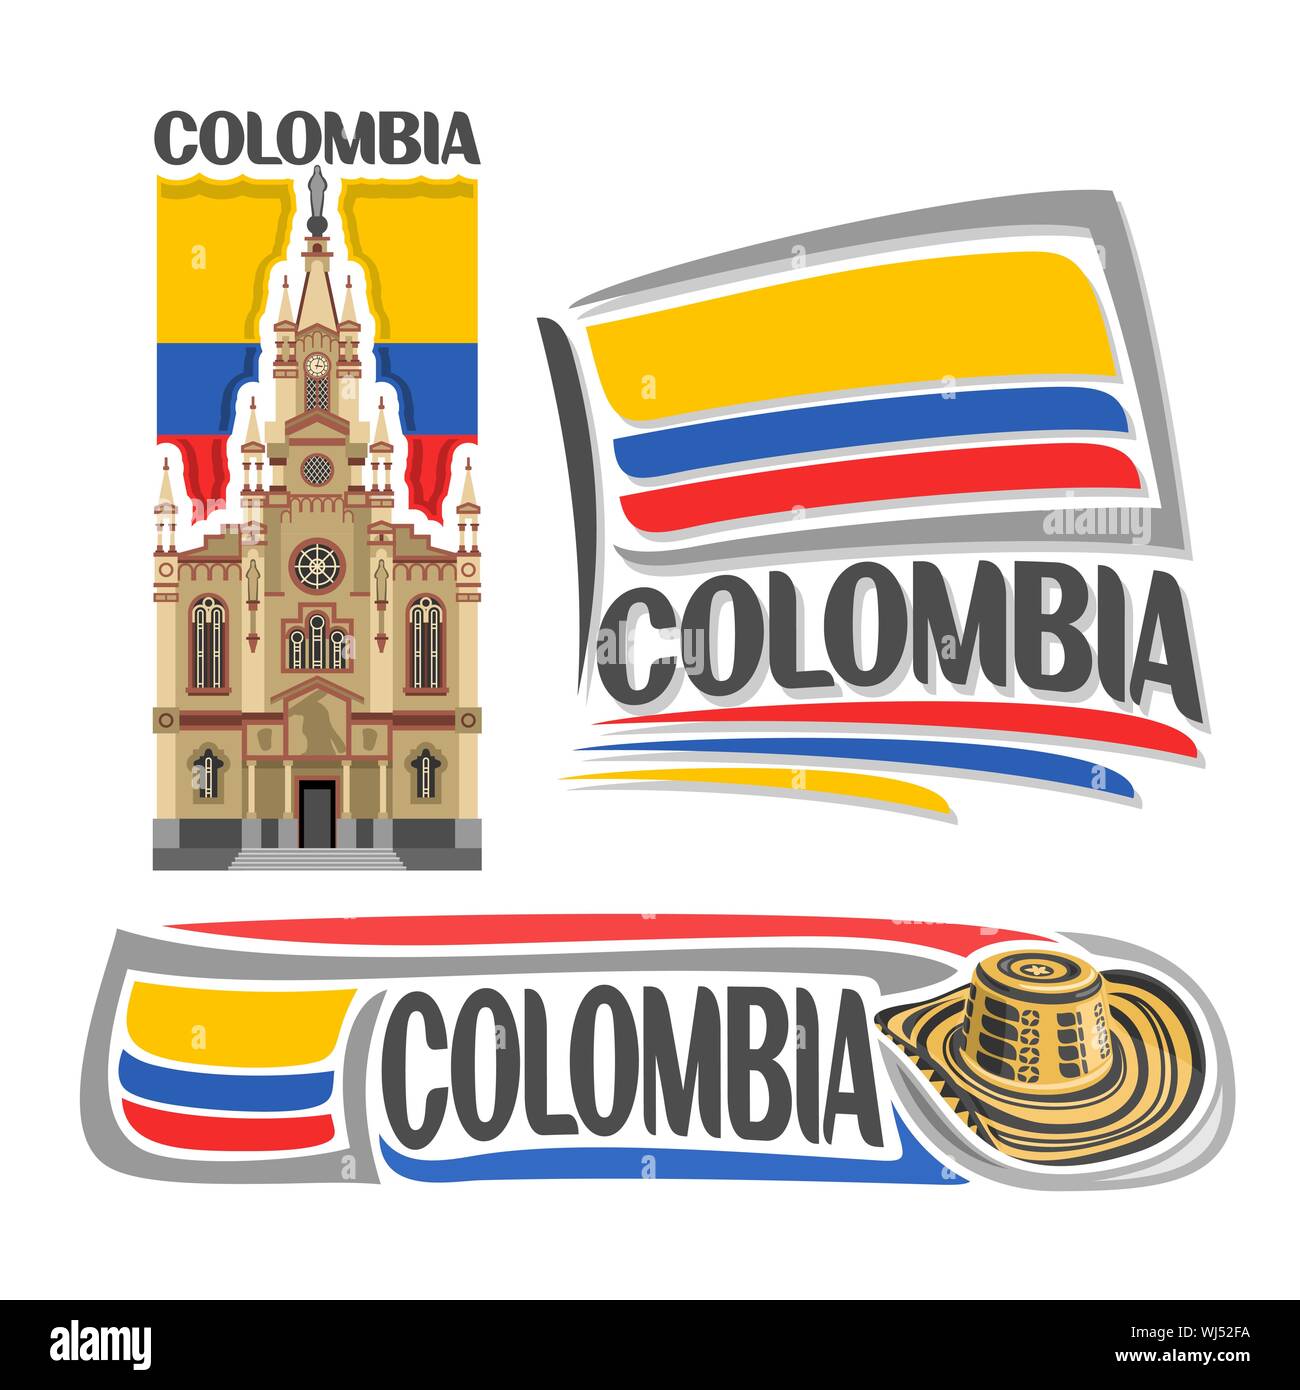 Vector logo for Colombia, 3 isolated images: Jesus Nazareno church in Medellin on background of colombian national state flag and hat sombrero vueltia Stock Vector